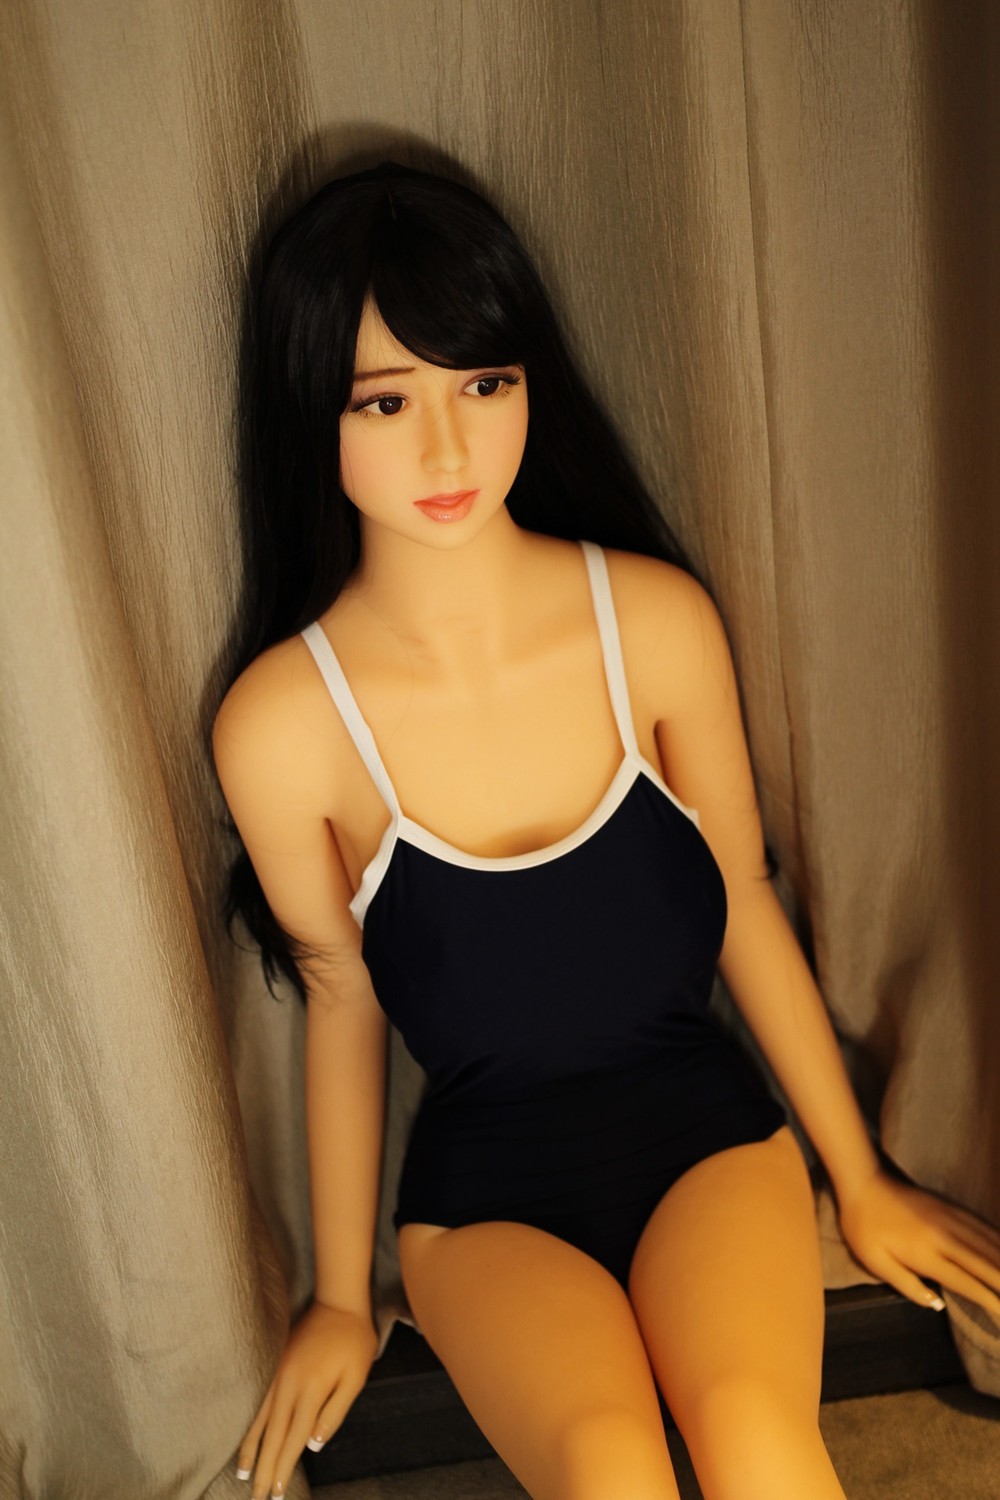 sex realistic sex doll toy